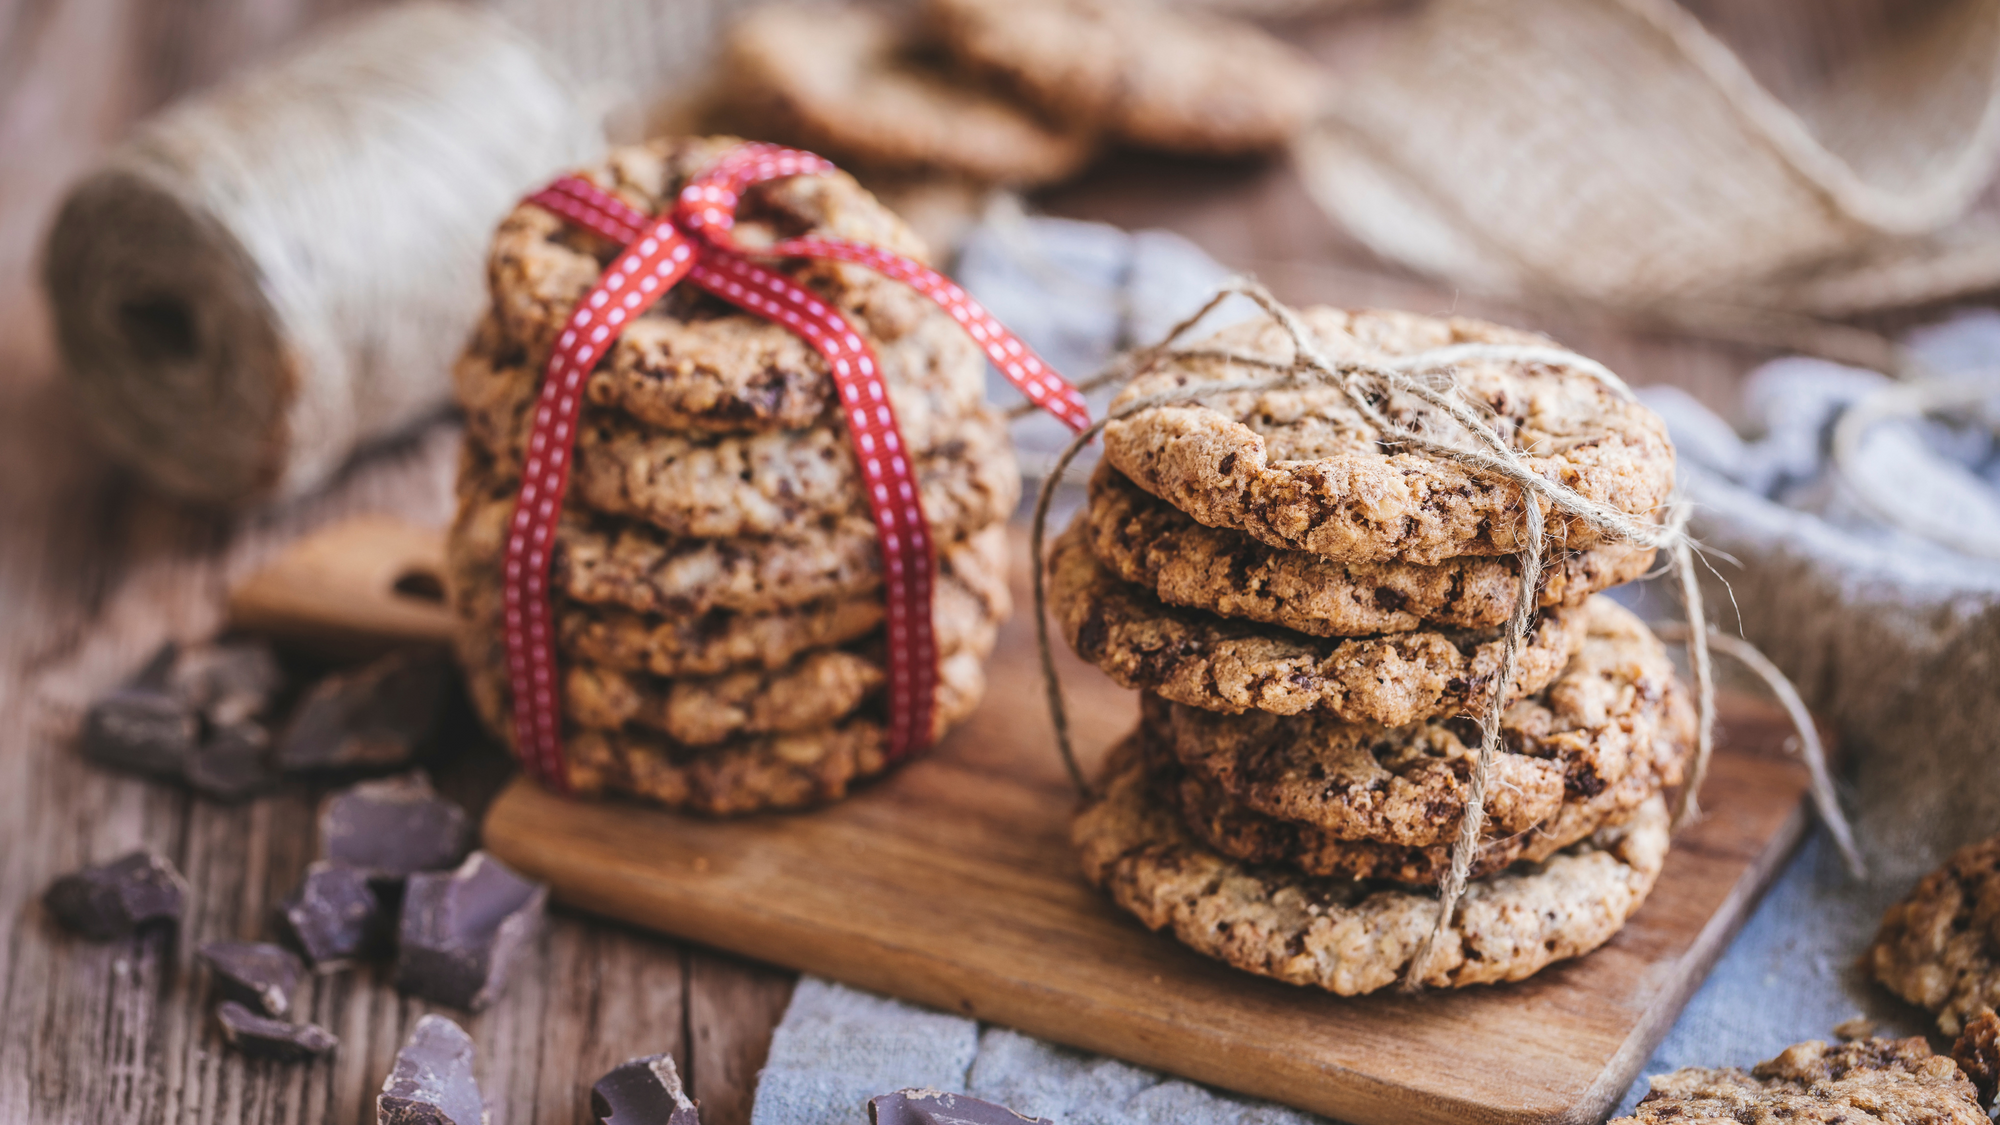 Deliver sweet impressions through your packaging on National Cookie Day